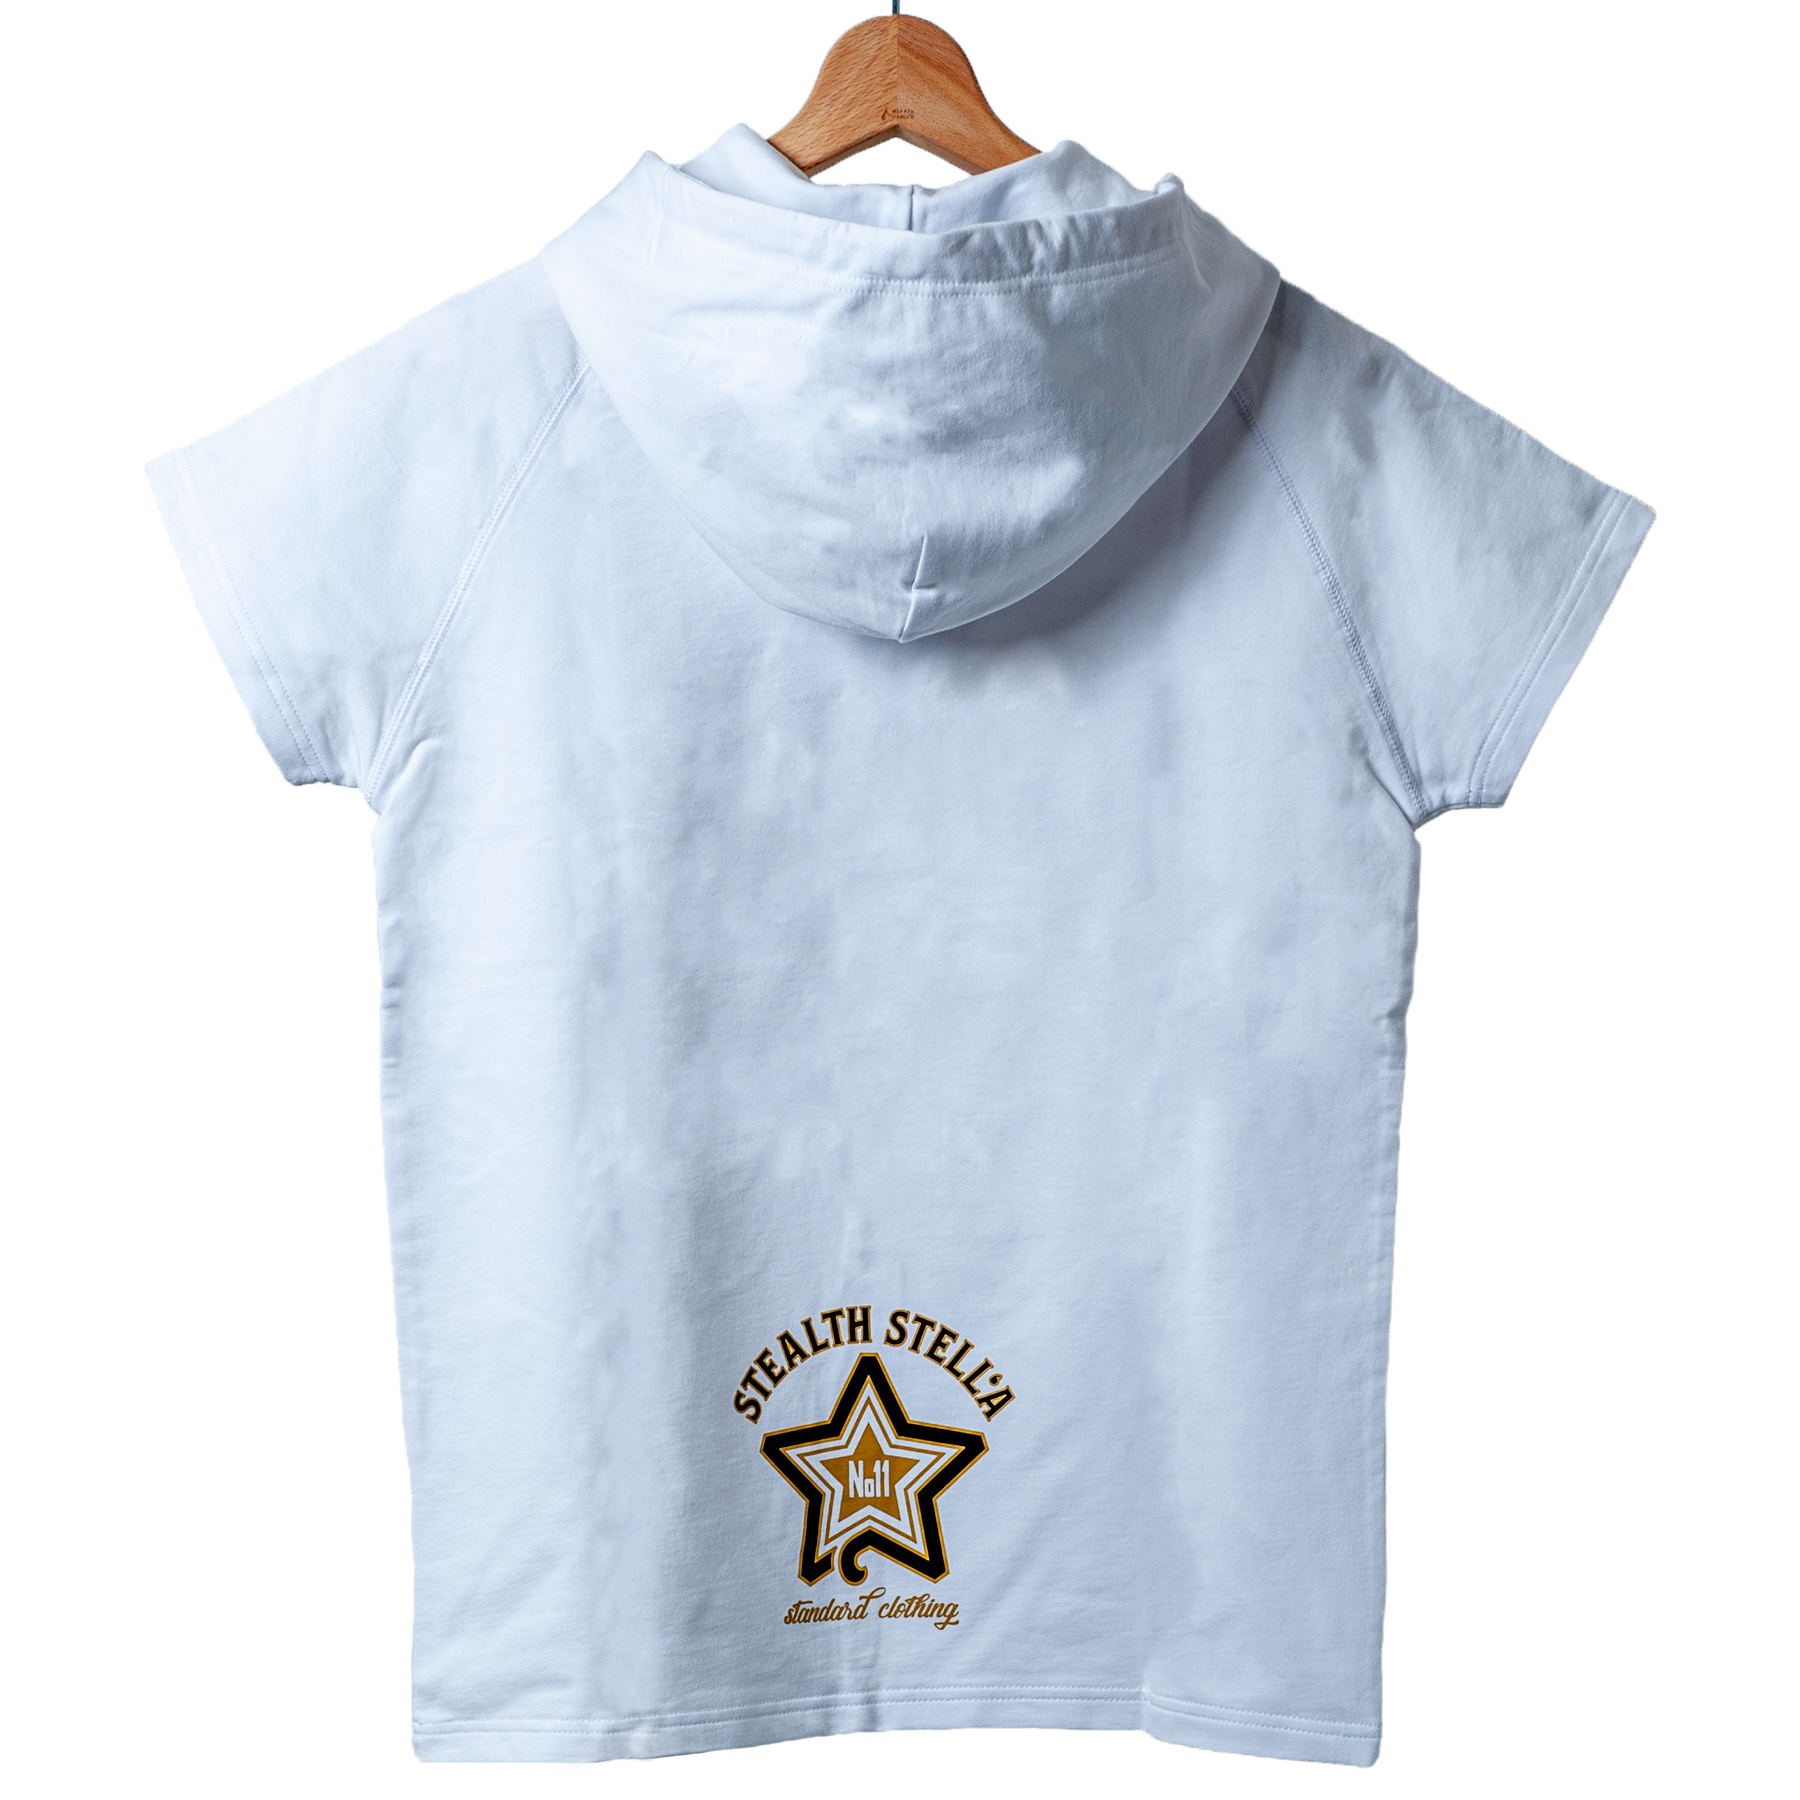 【STEALTH STELL'A】COUNTRY-FRENCH PK（WHITE）